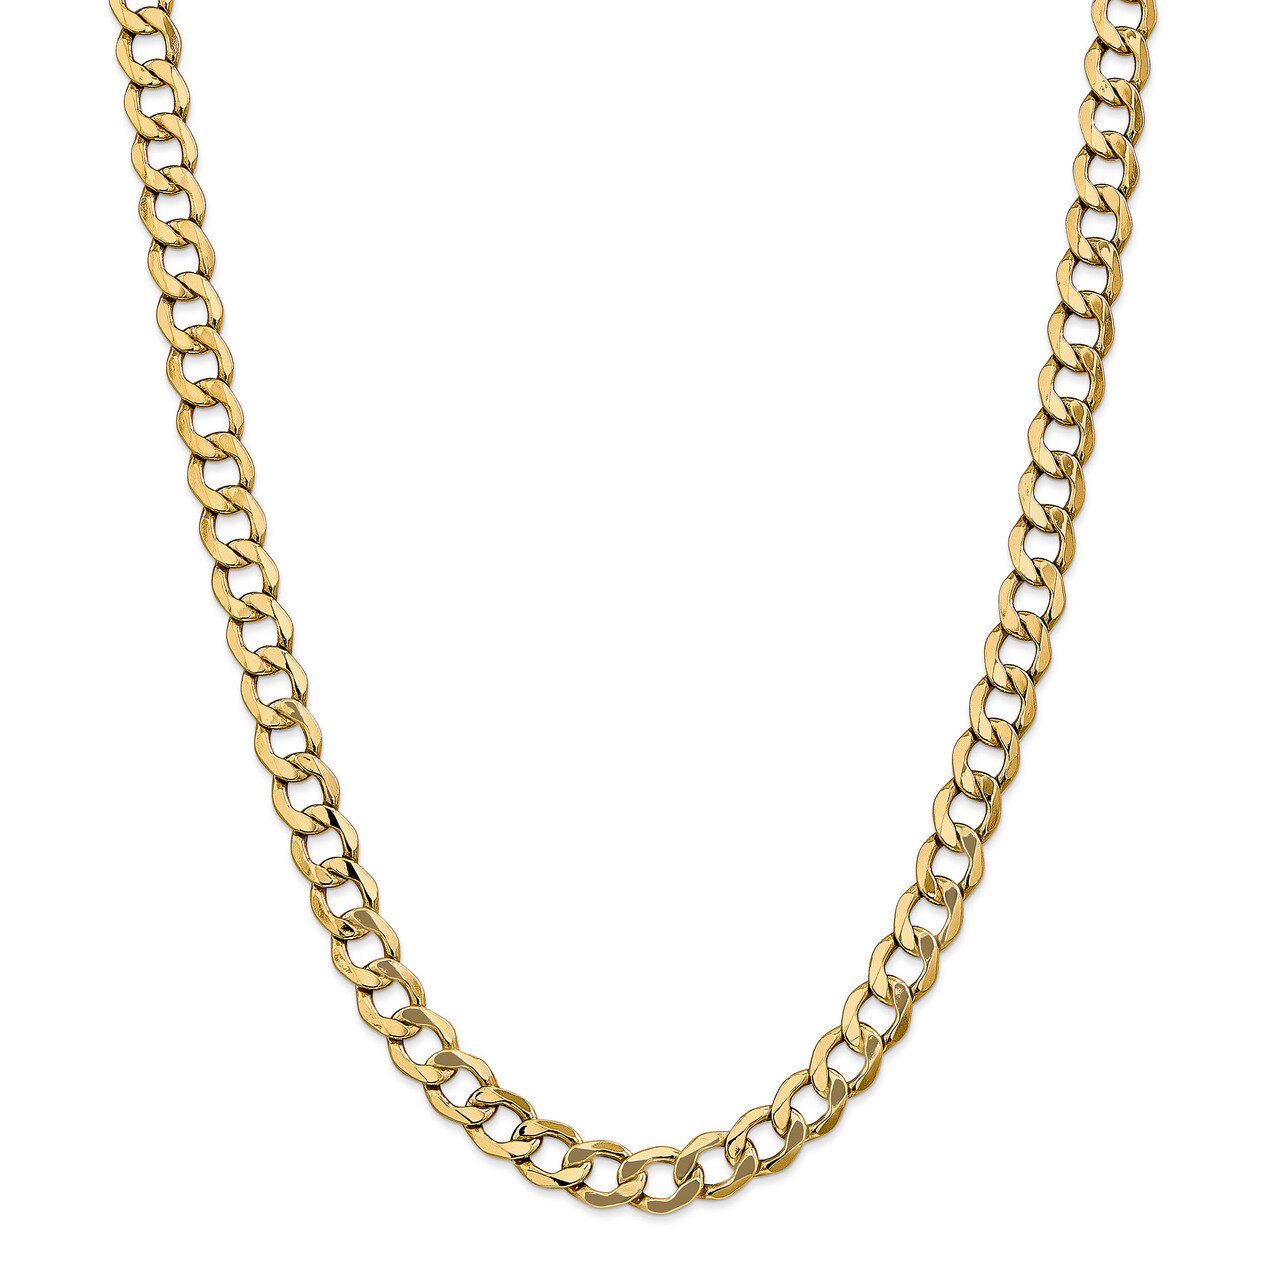 26 Inch 8.0mm Semi-Solid Curb Link Chain 14k Gold BC111-26